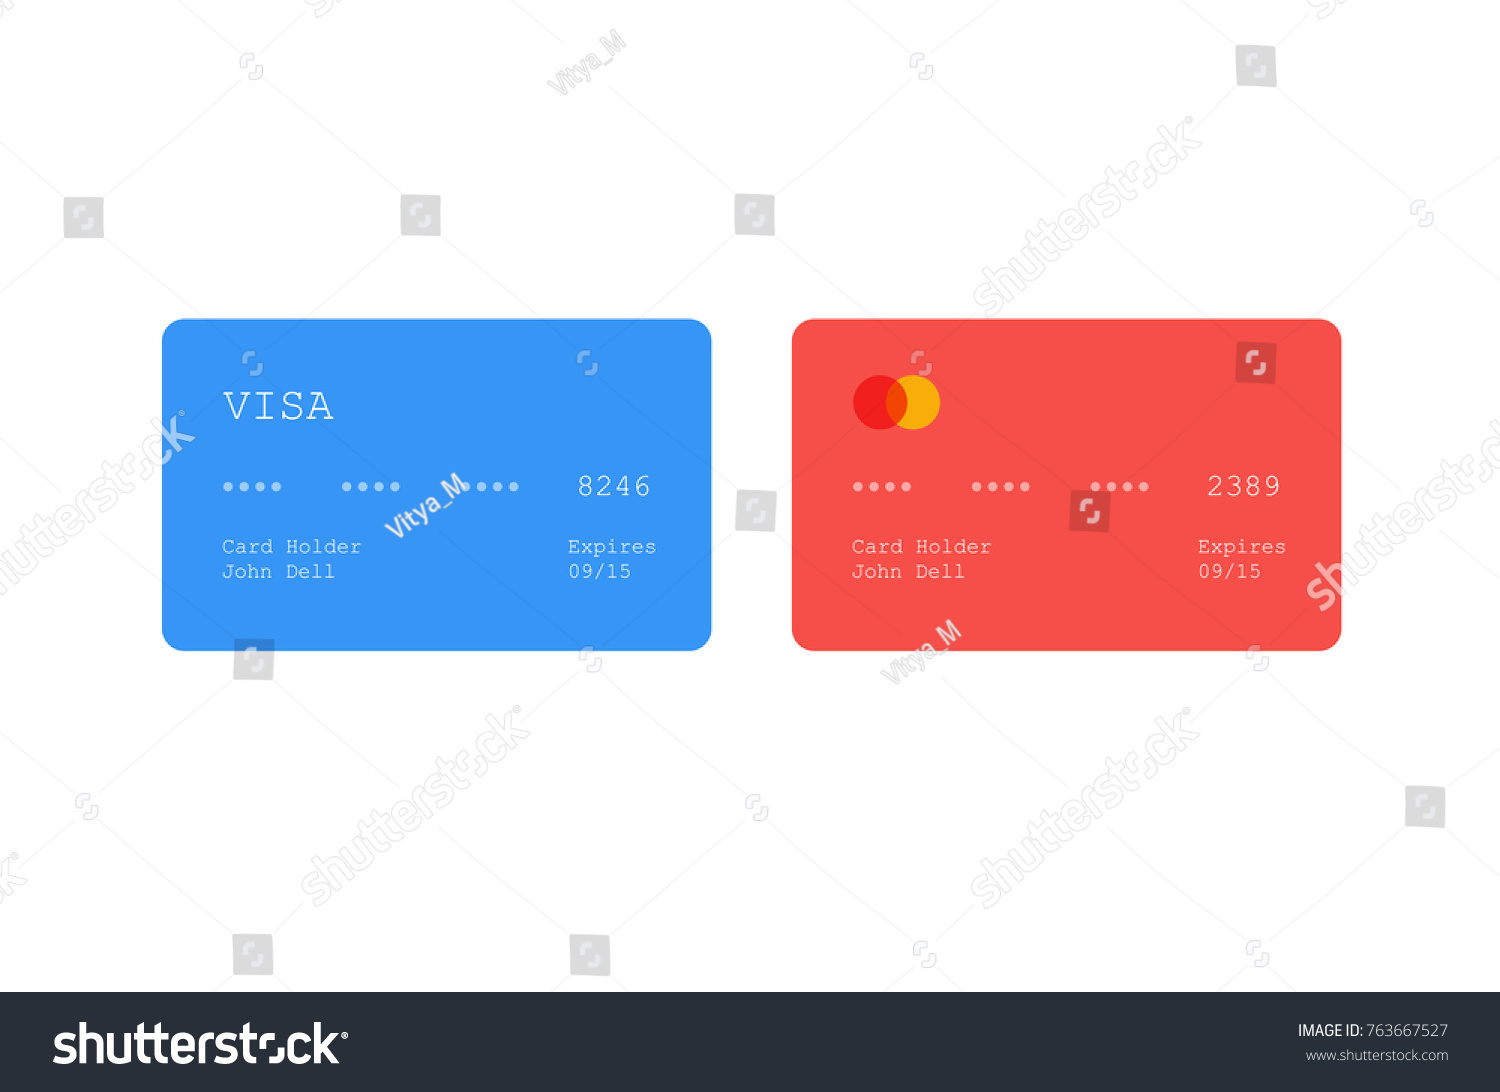 Vector credit card icon. Flat credit card icon. Flat design vector illustration concept for web banner,web and mobile application. Credit card icon graphic. Vector icon isolated on gradient background #763667527